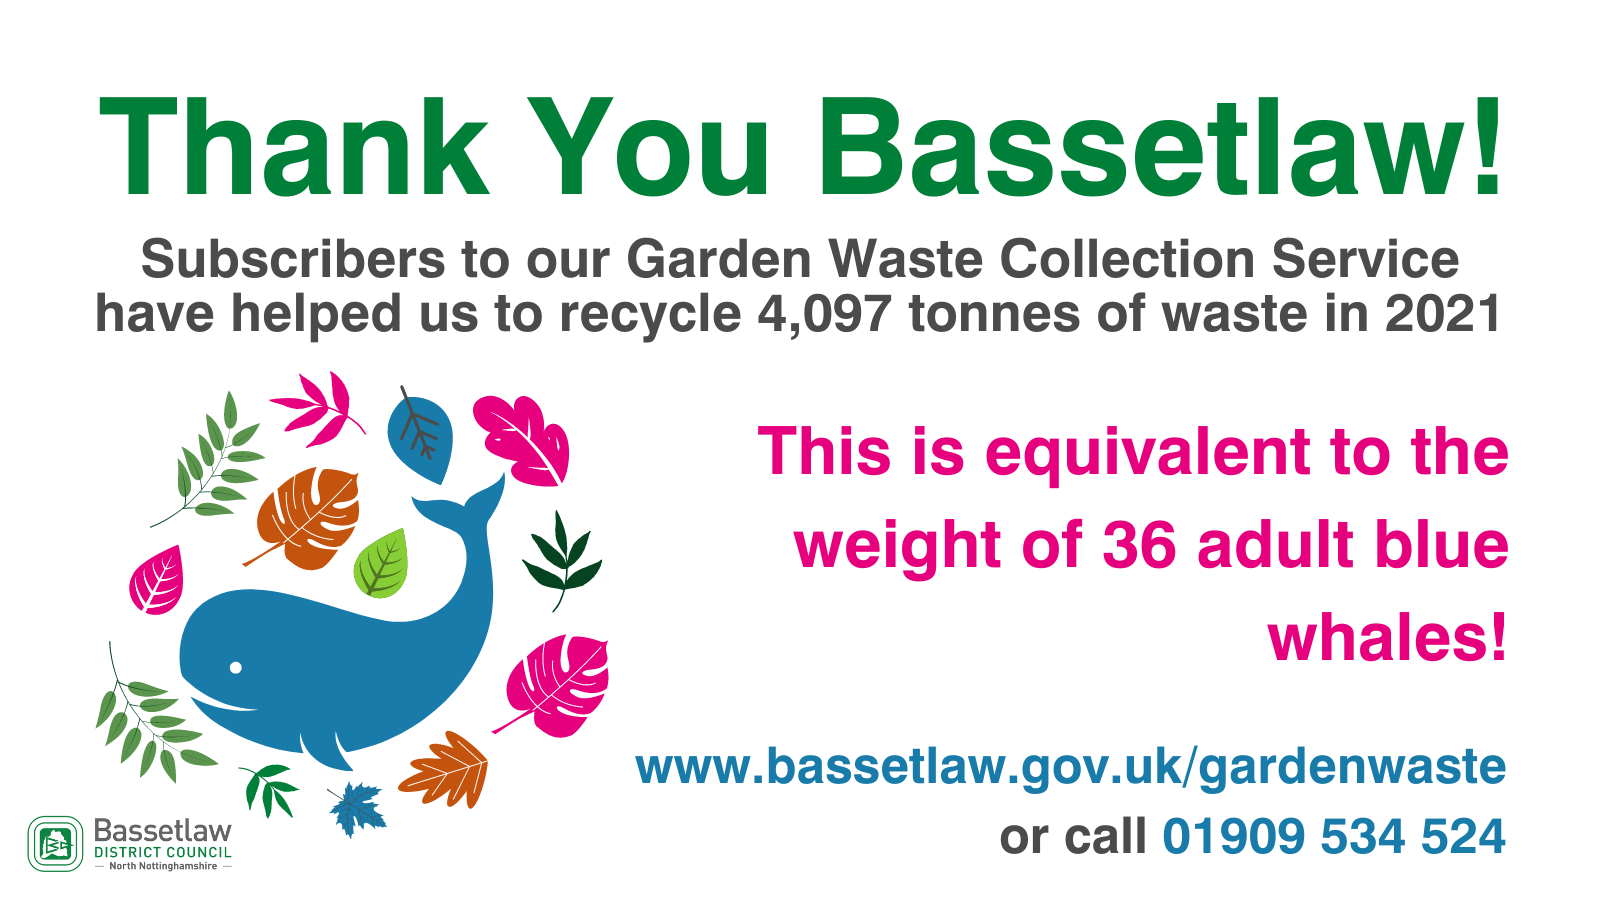 Garden Waste Collections boost recycling